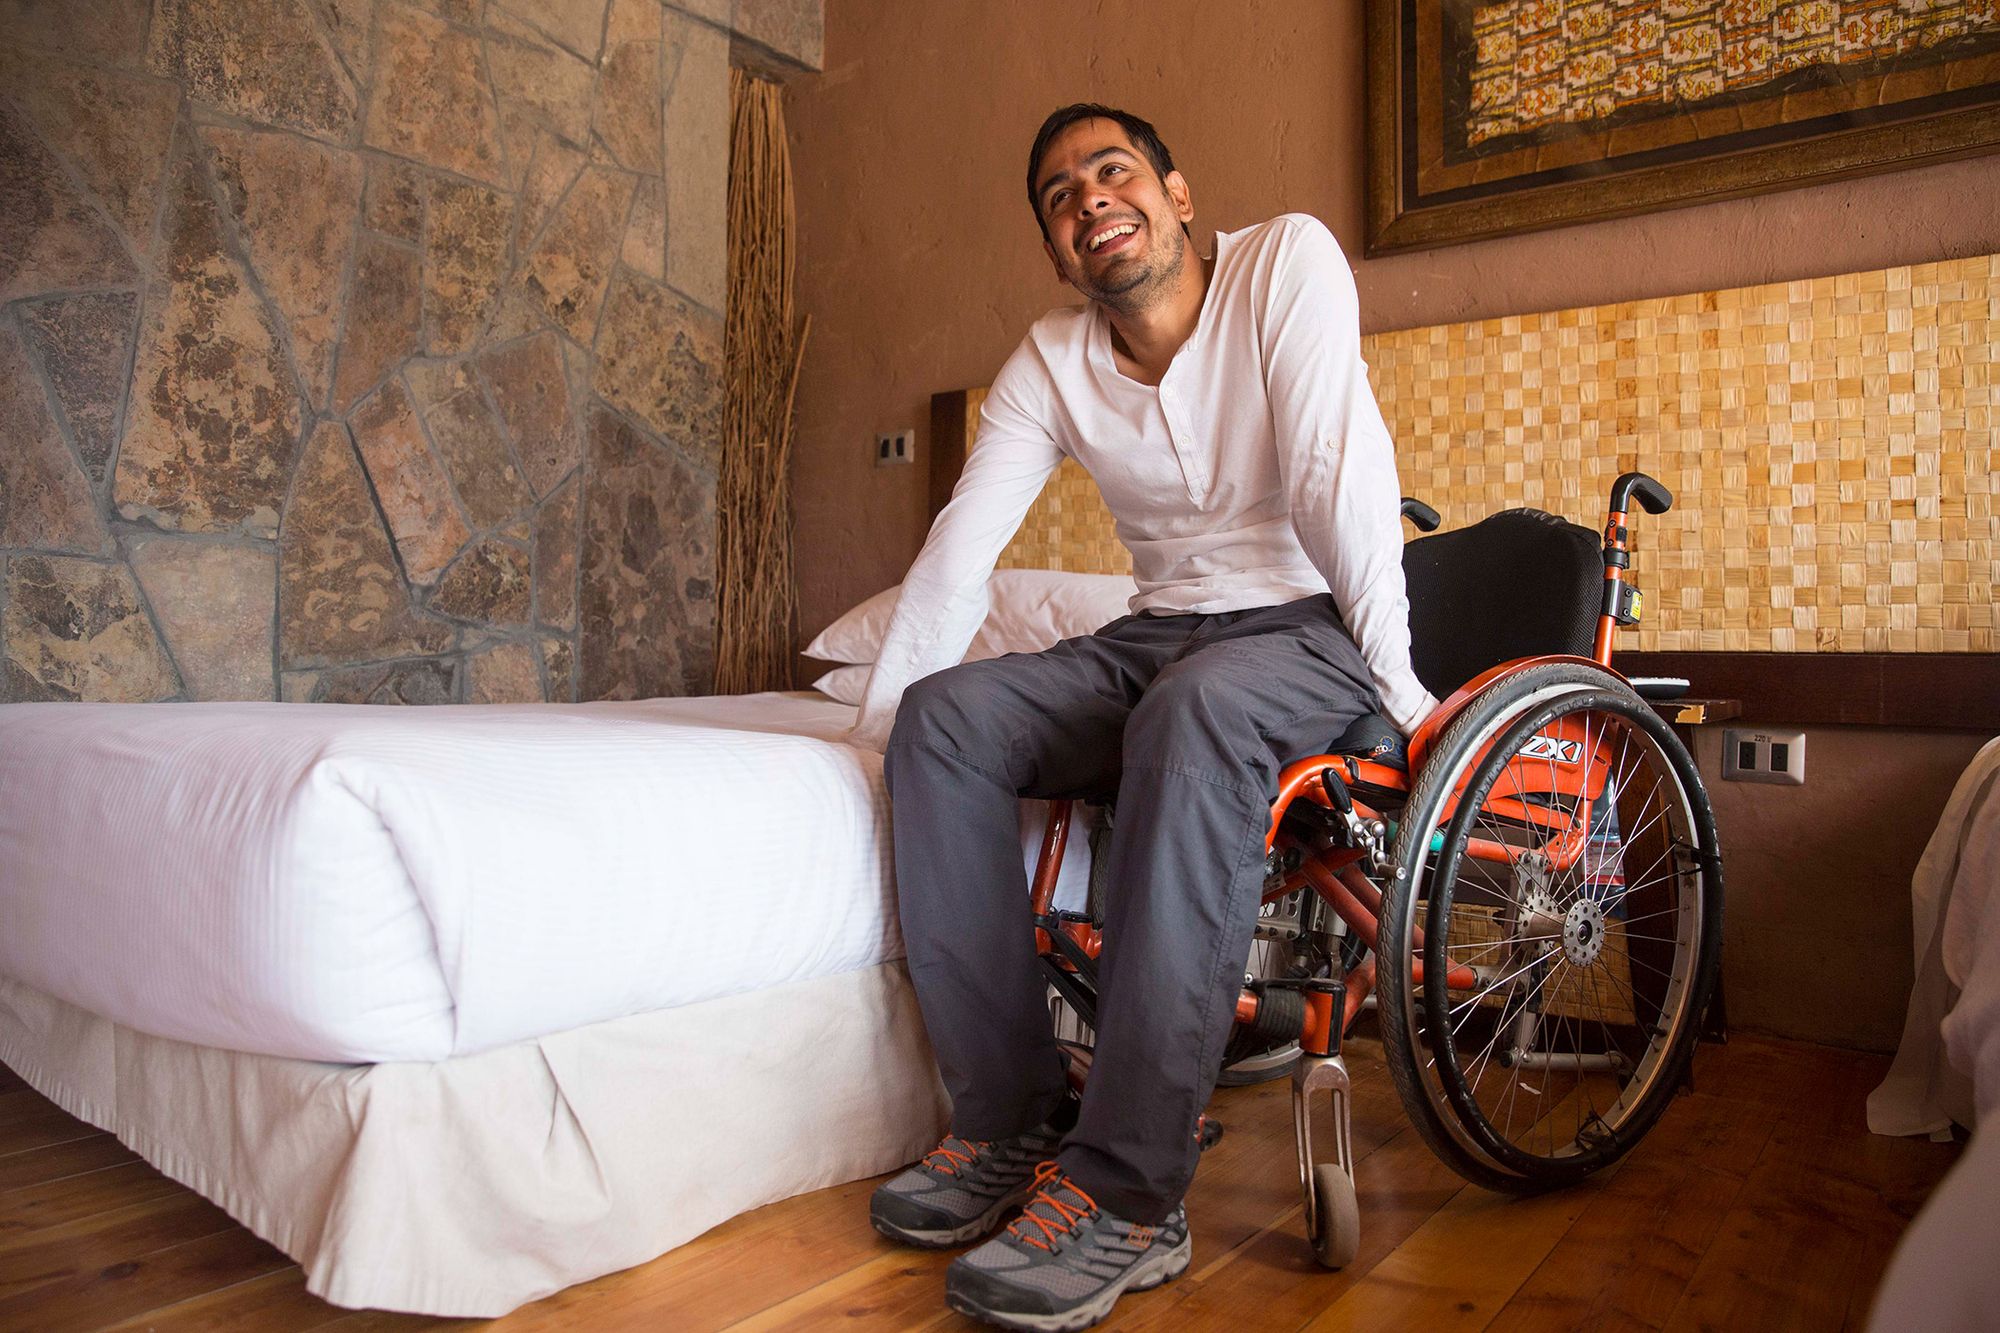 Accessible bed height is typically 22"-25" for most wheelchair users.